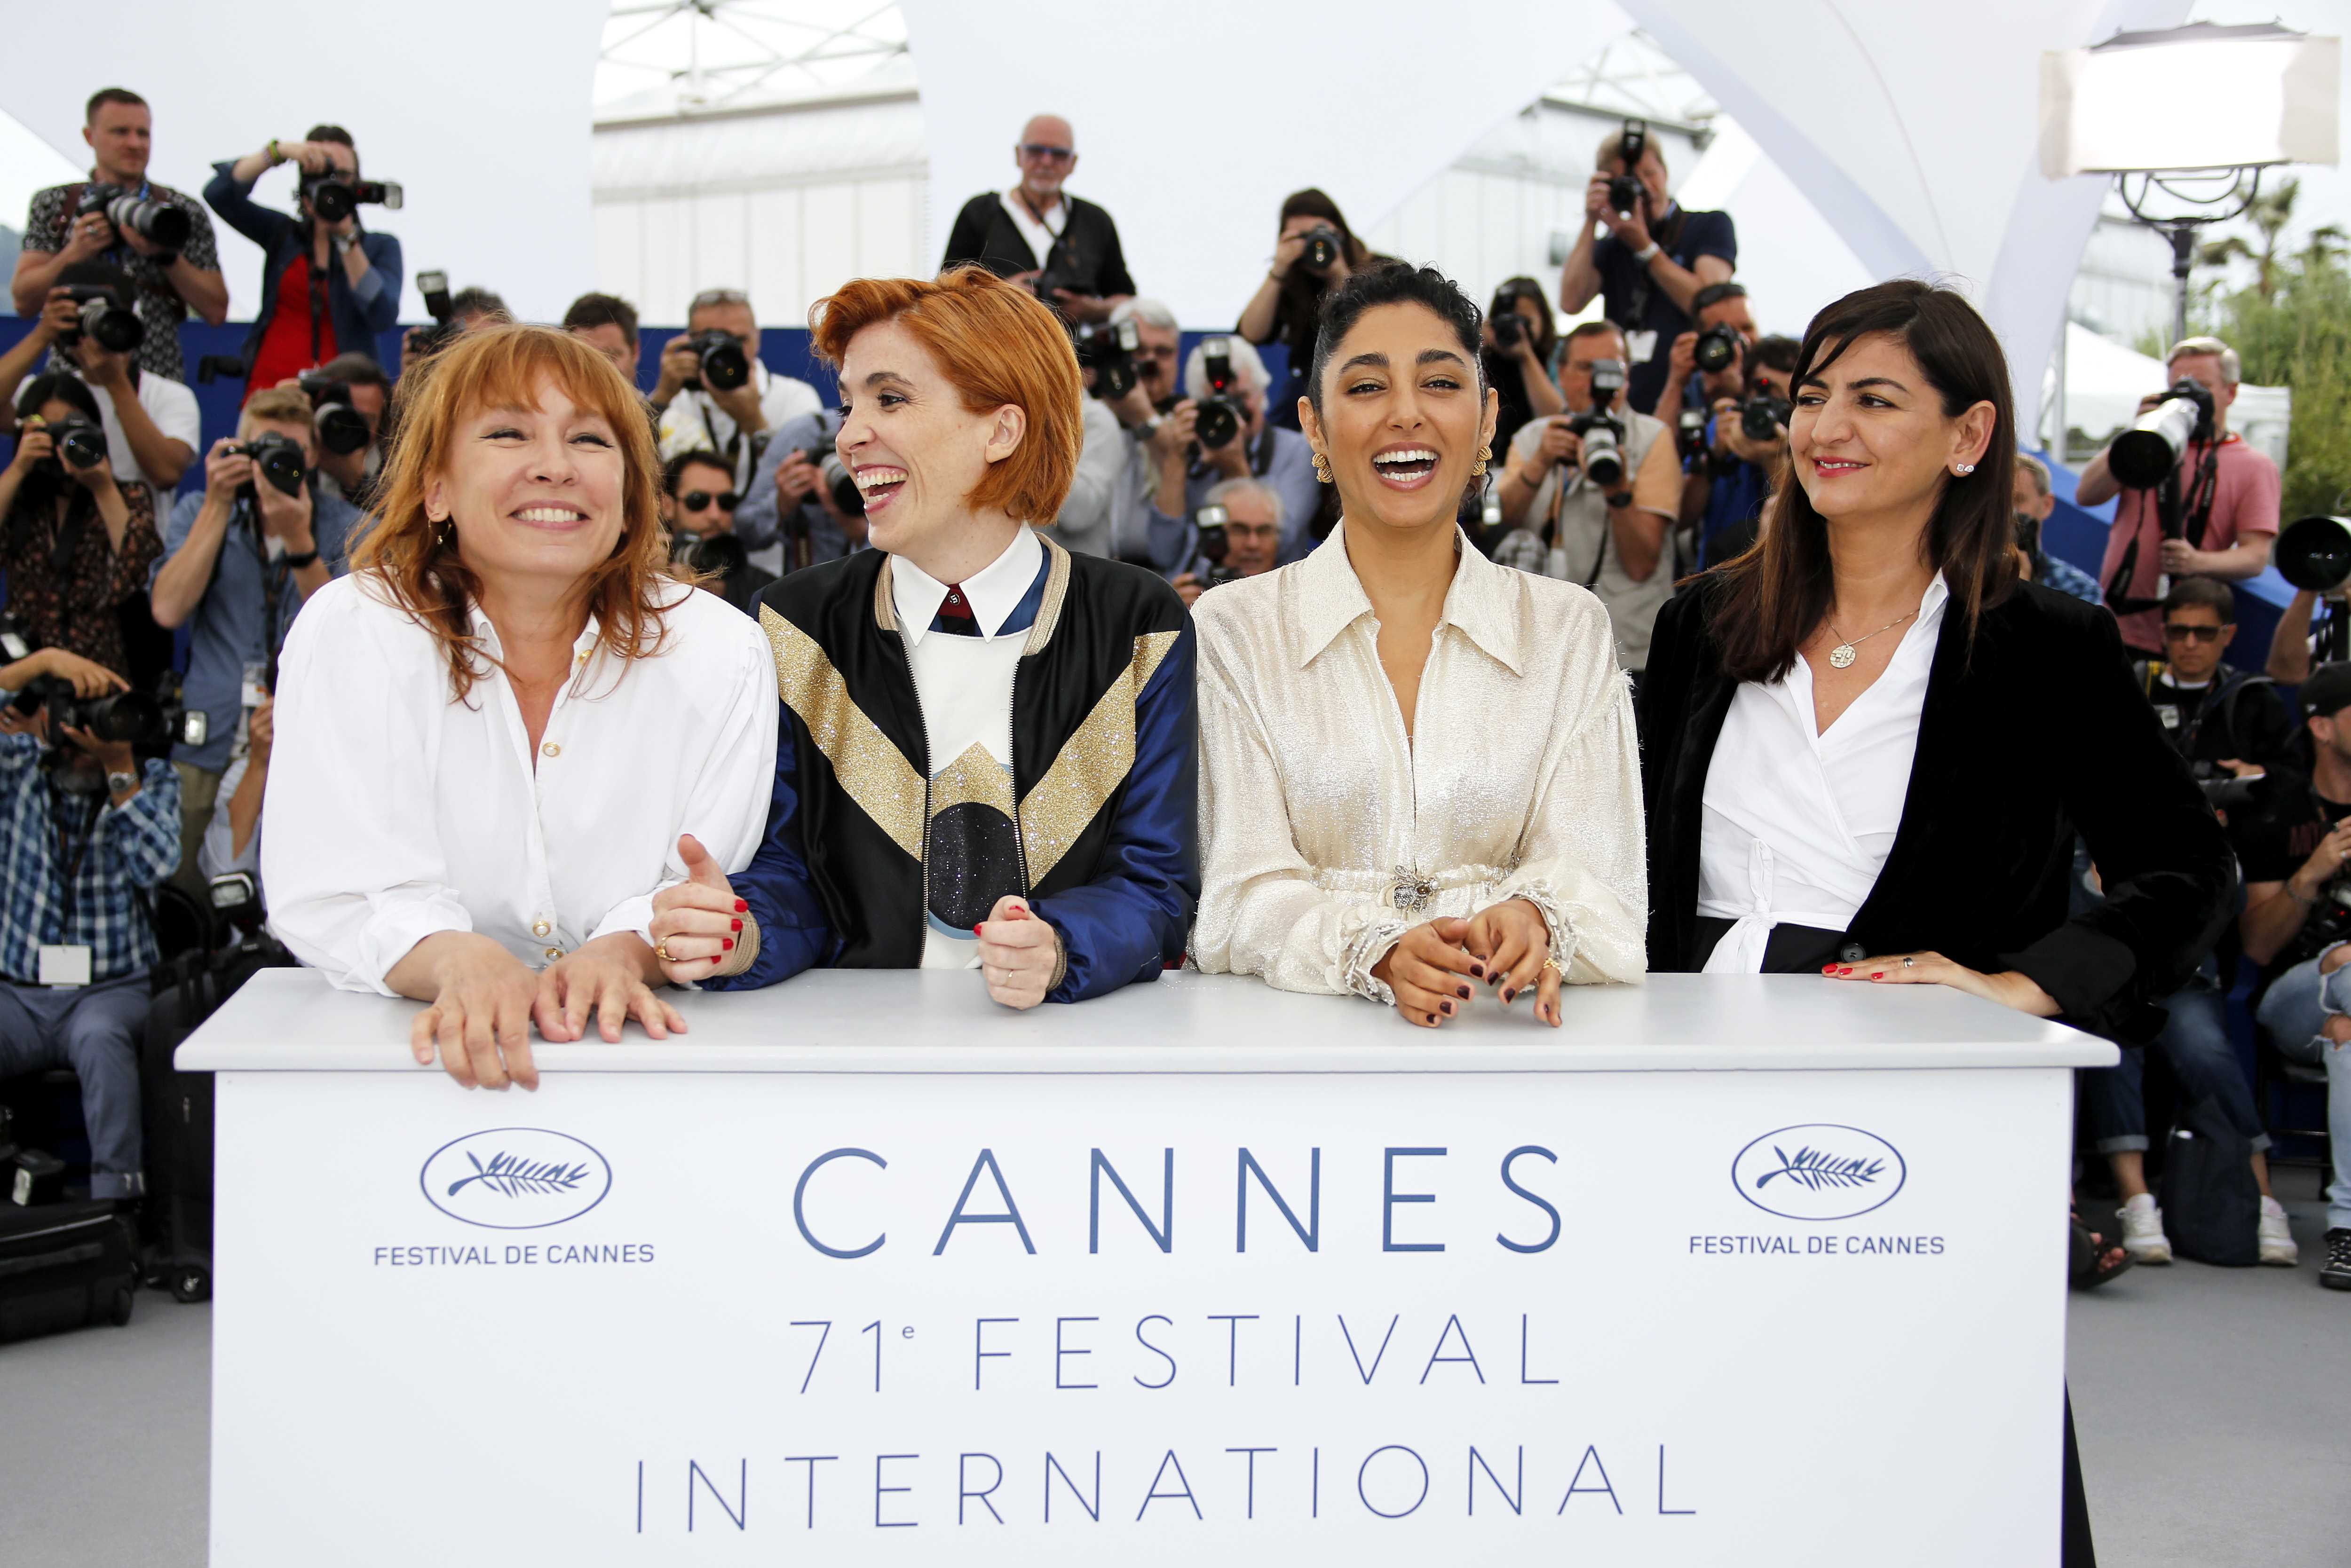 Women take over the red carpet at Cannes